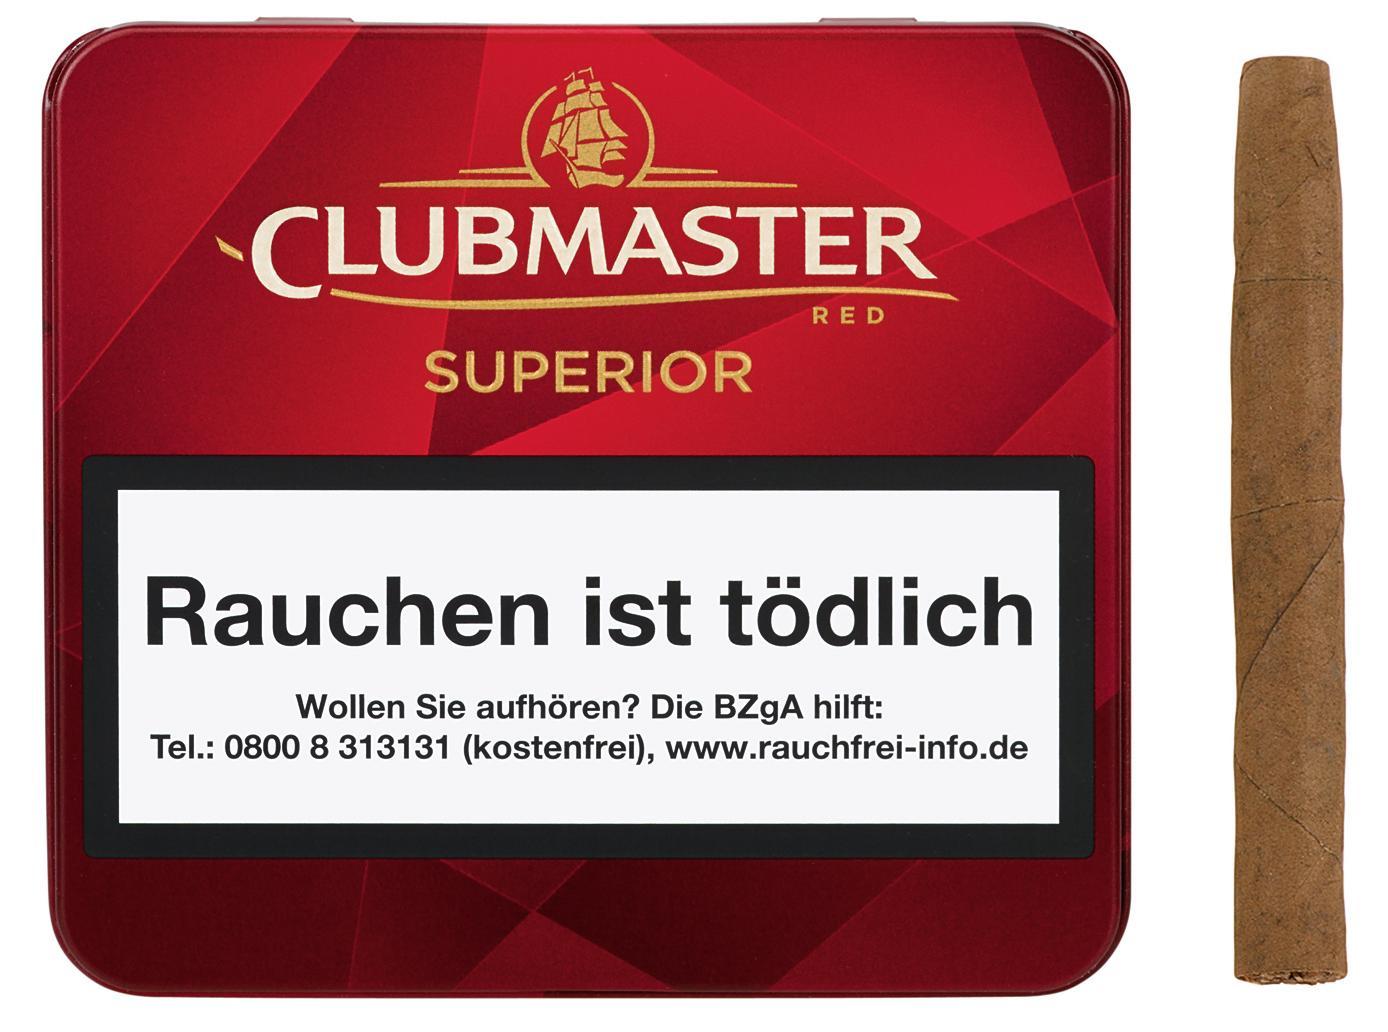 Clubmaster Superior Red ohne Filter Nr. 229 5 x 20 Zigarillos 20St